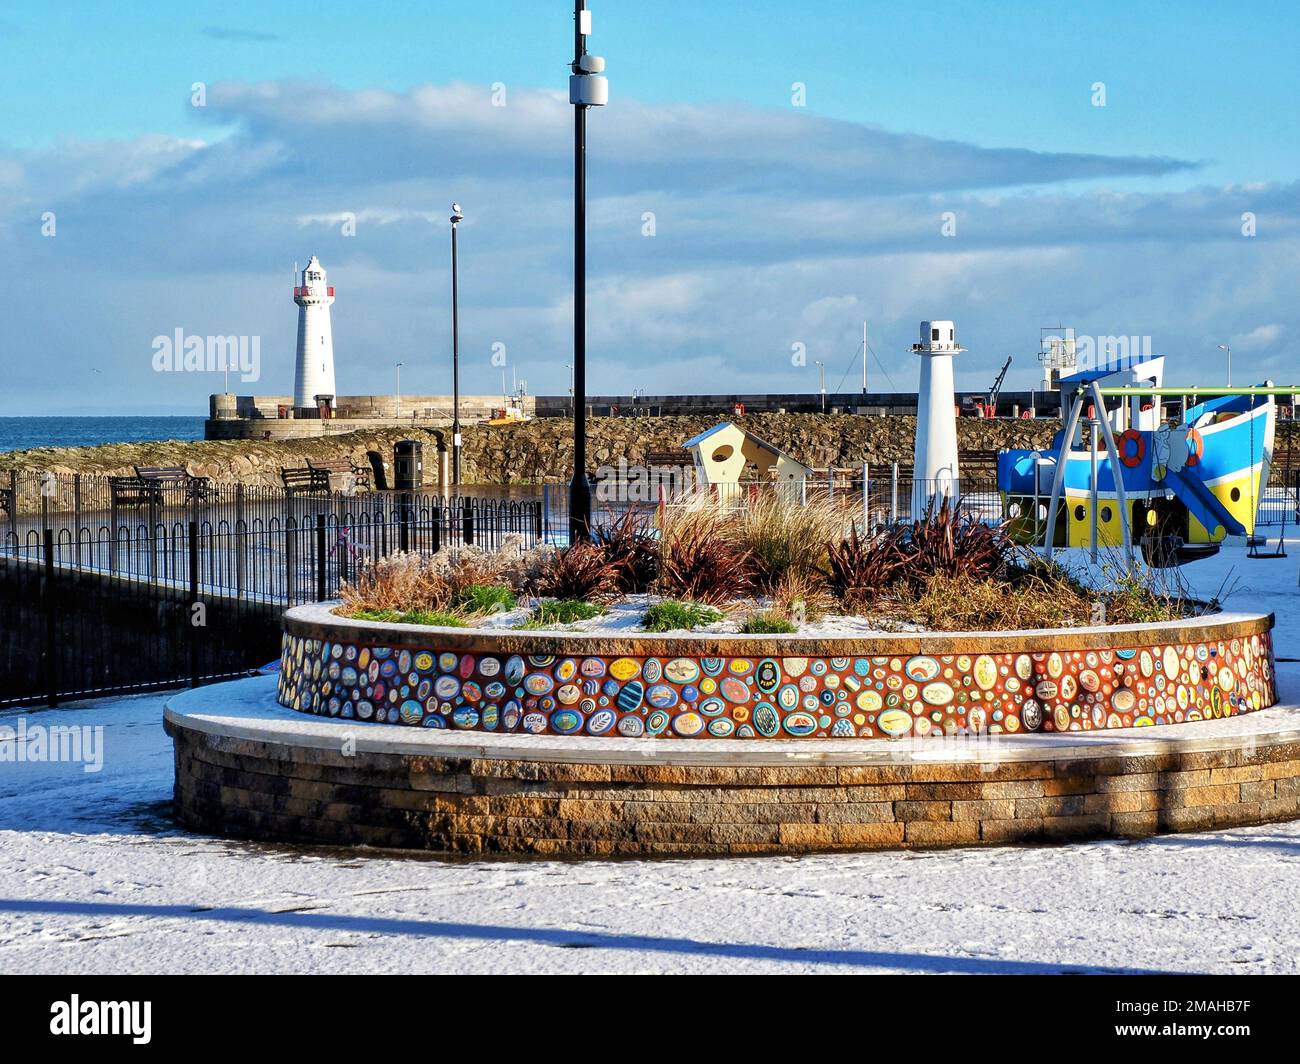 NHS pebbles in new street furniture in Donaghadee Stock Photo